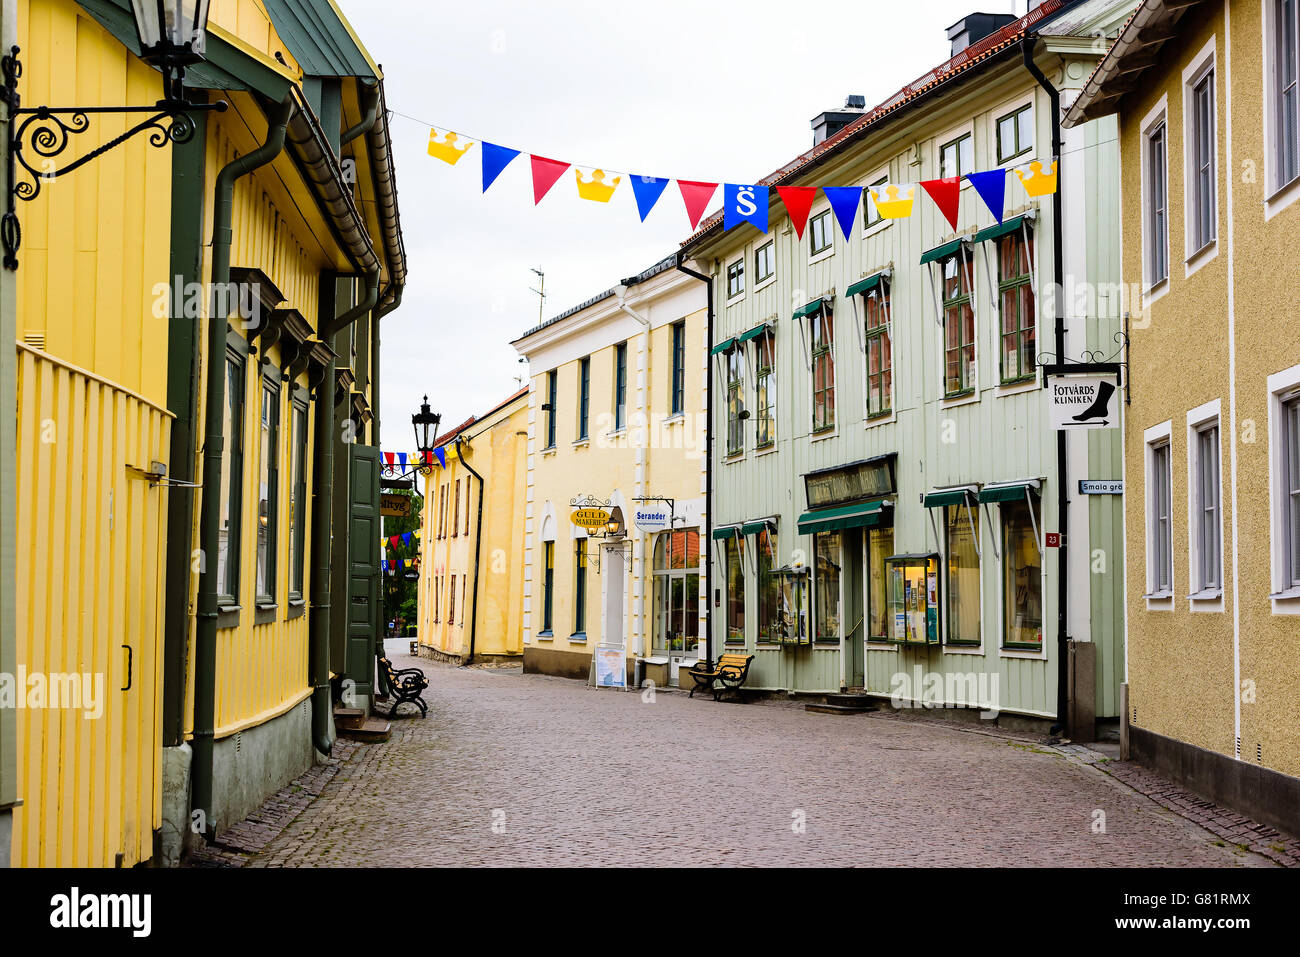 Soderkoping, Sweden - June 20, 2016: View along the street Storgatan in town. Lots of old buildings and fine shops. The street i Stock Photo